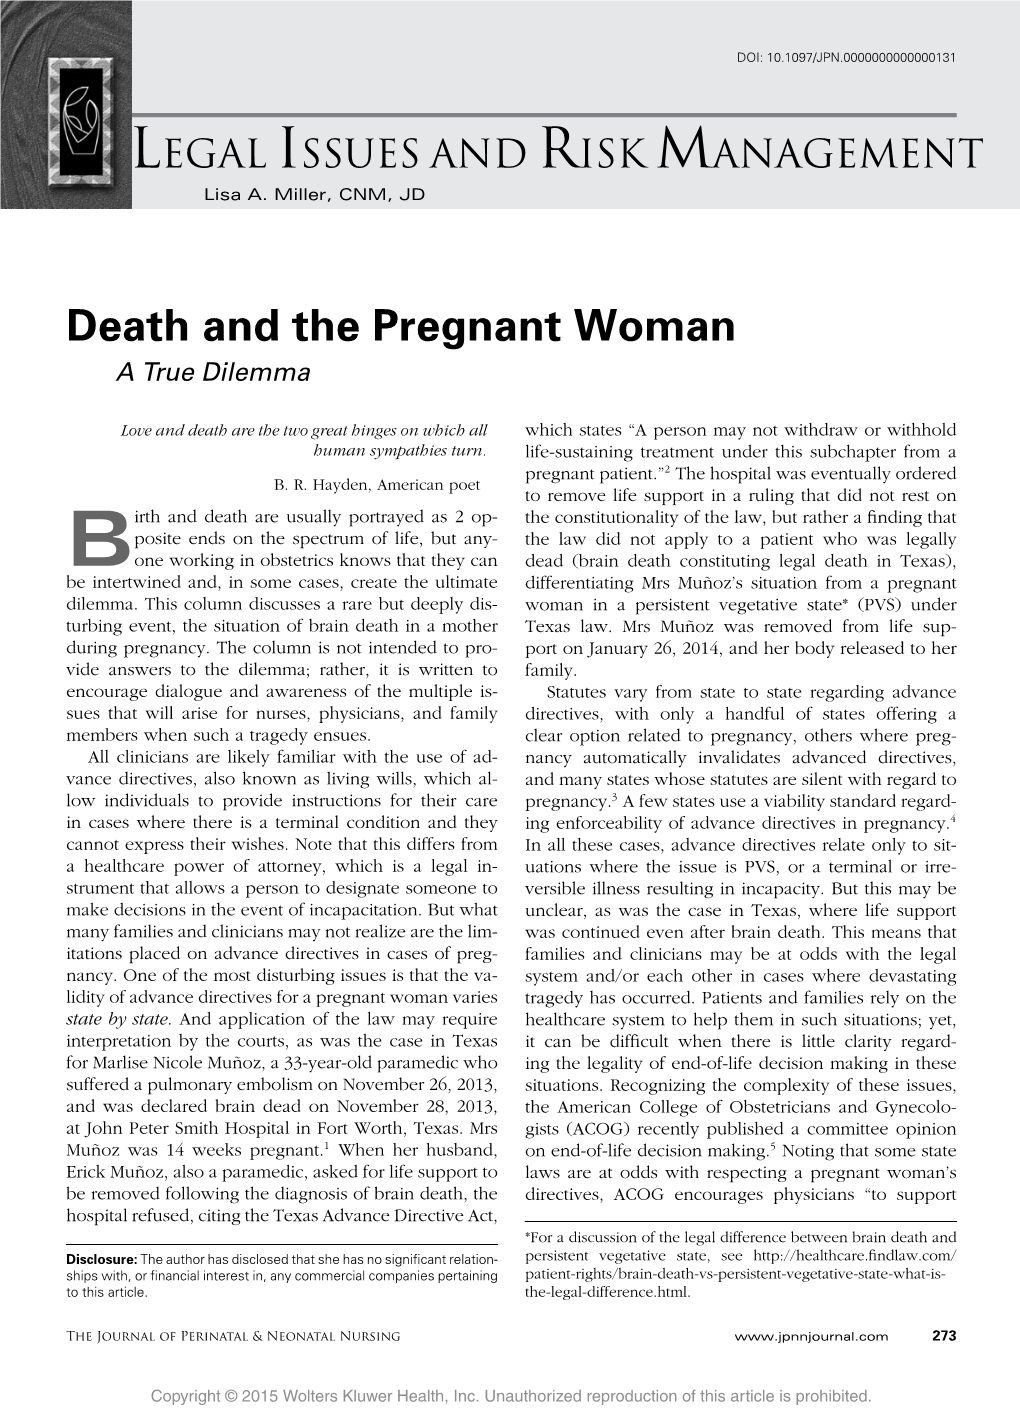 Death and the Pregnant Woman a True Dilemma